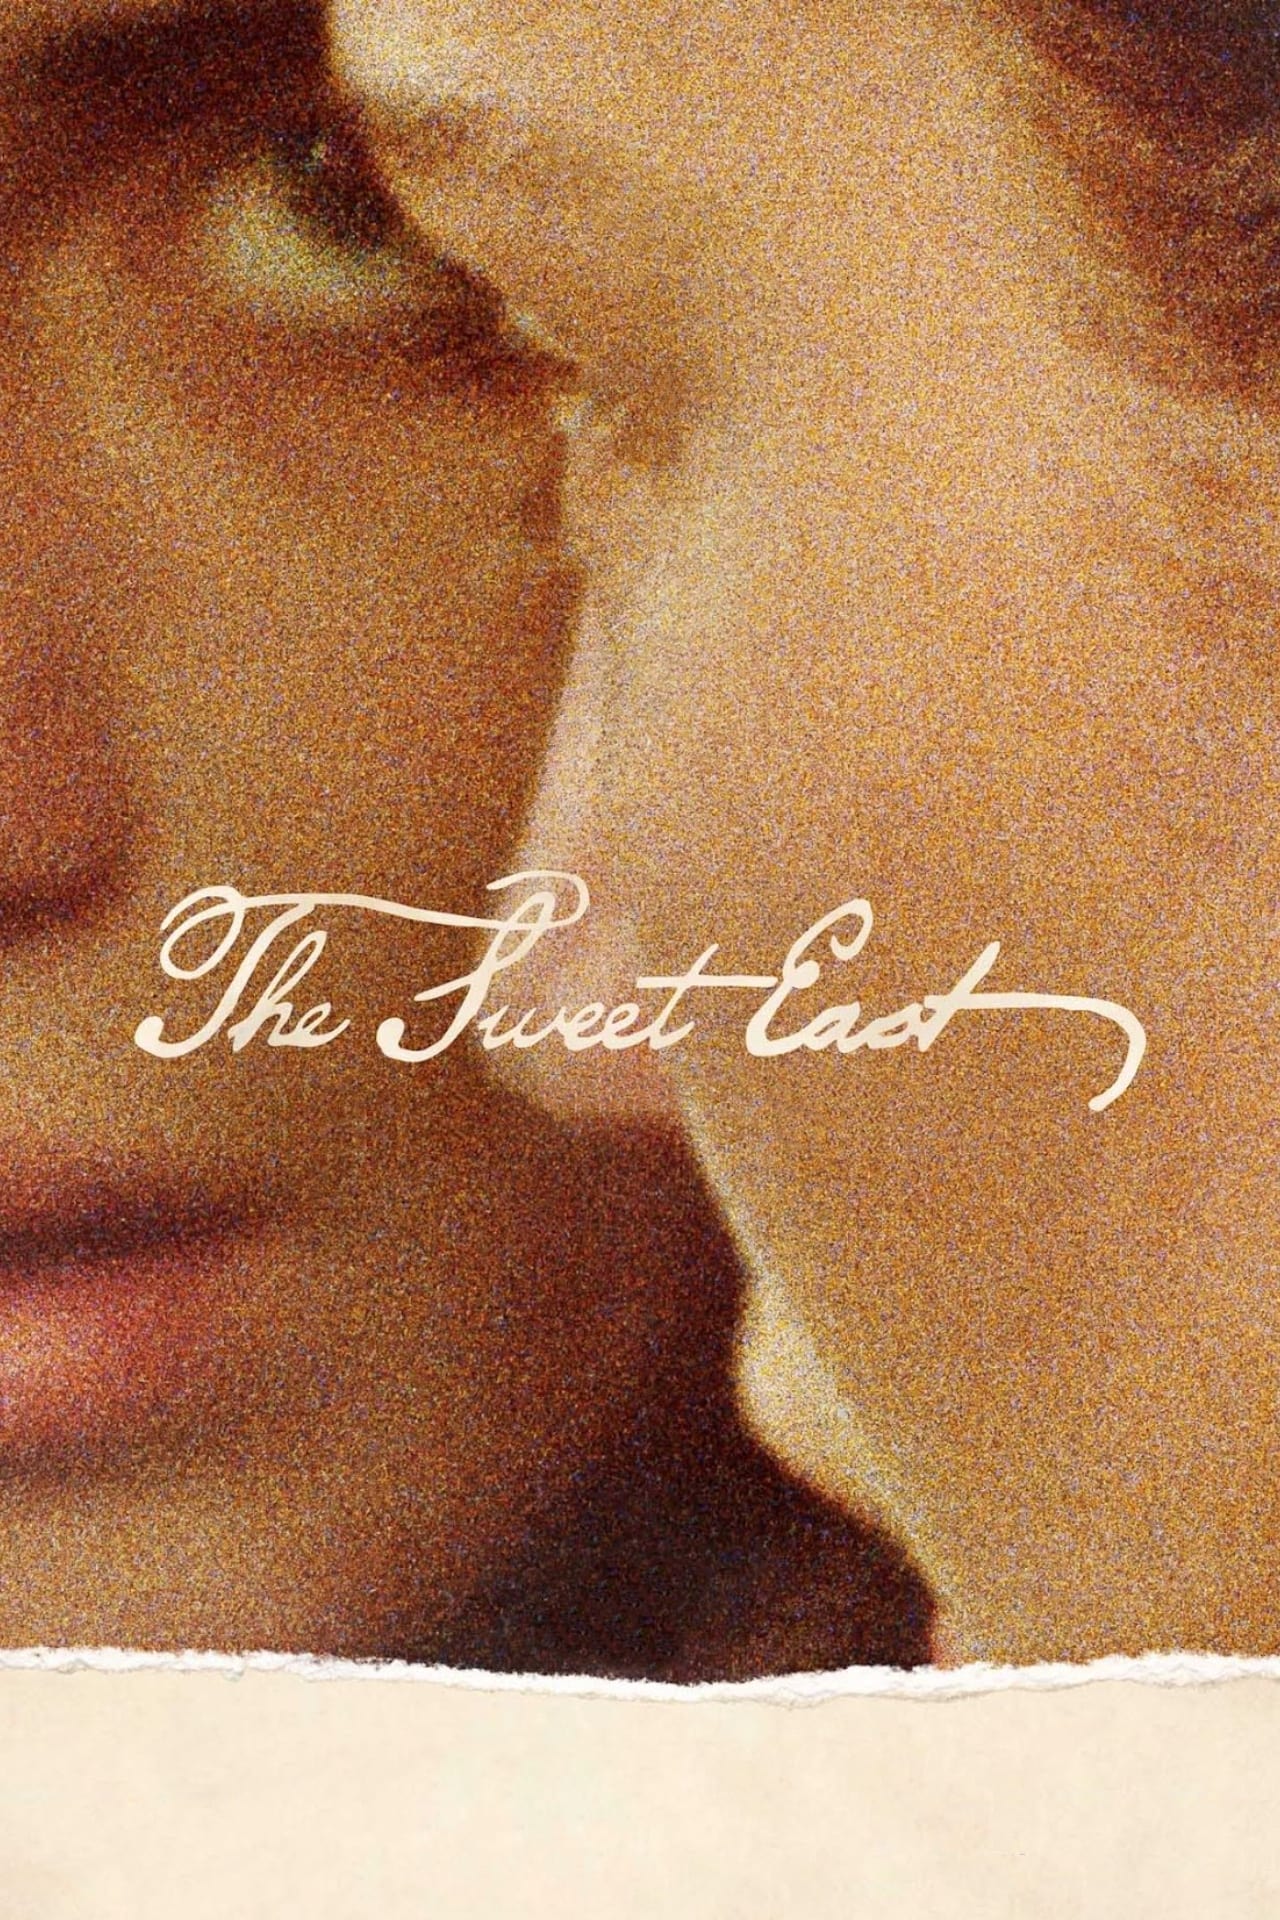 Poster for the movie "The Sweet East"